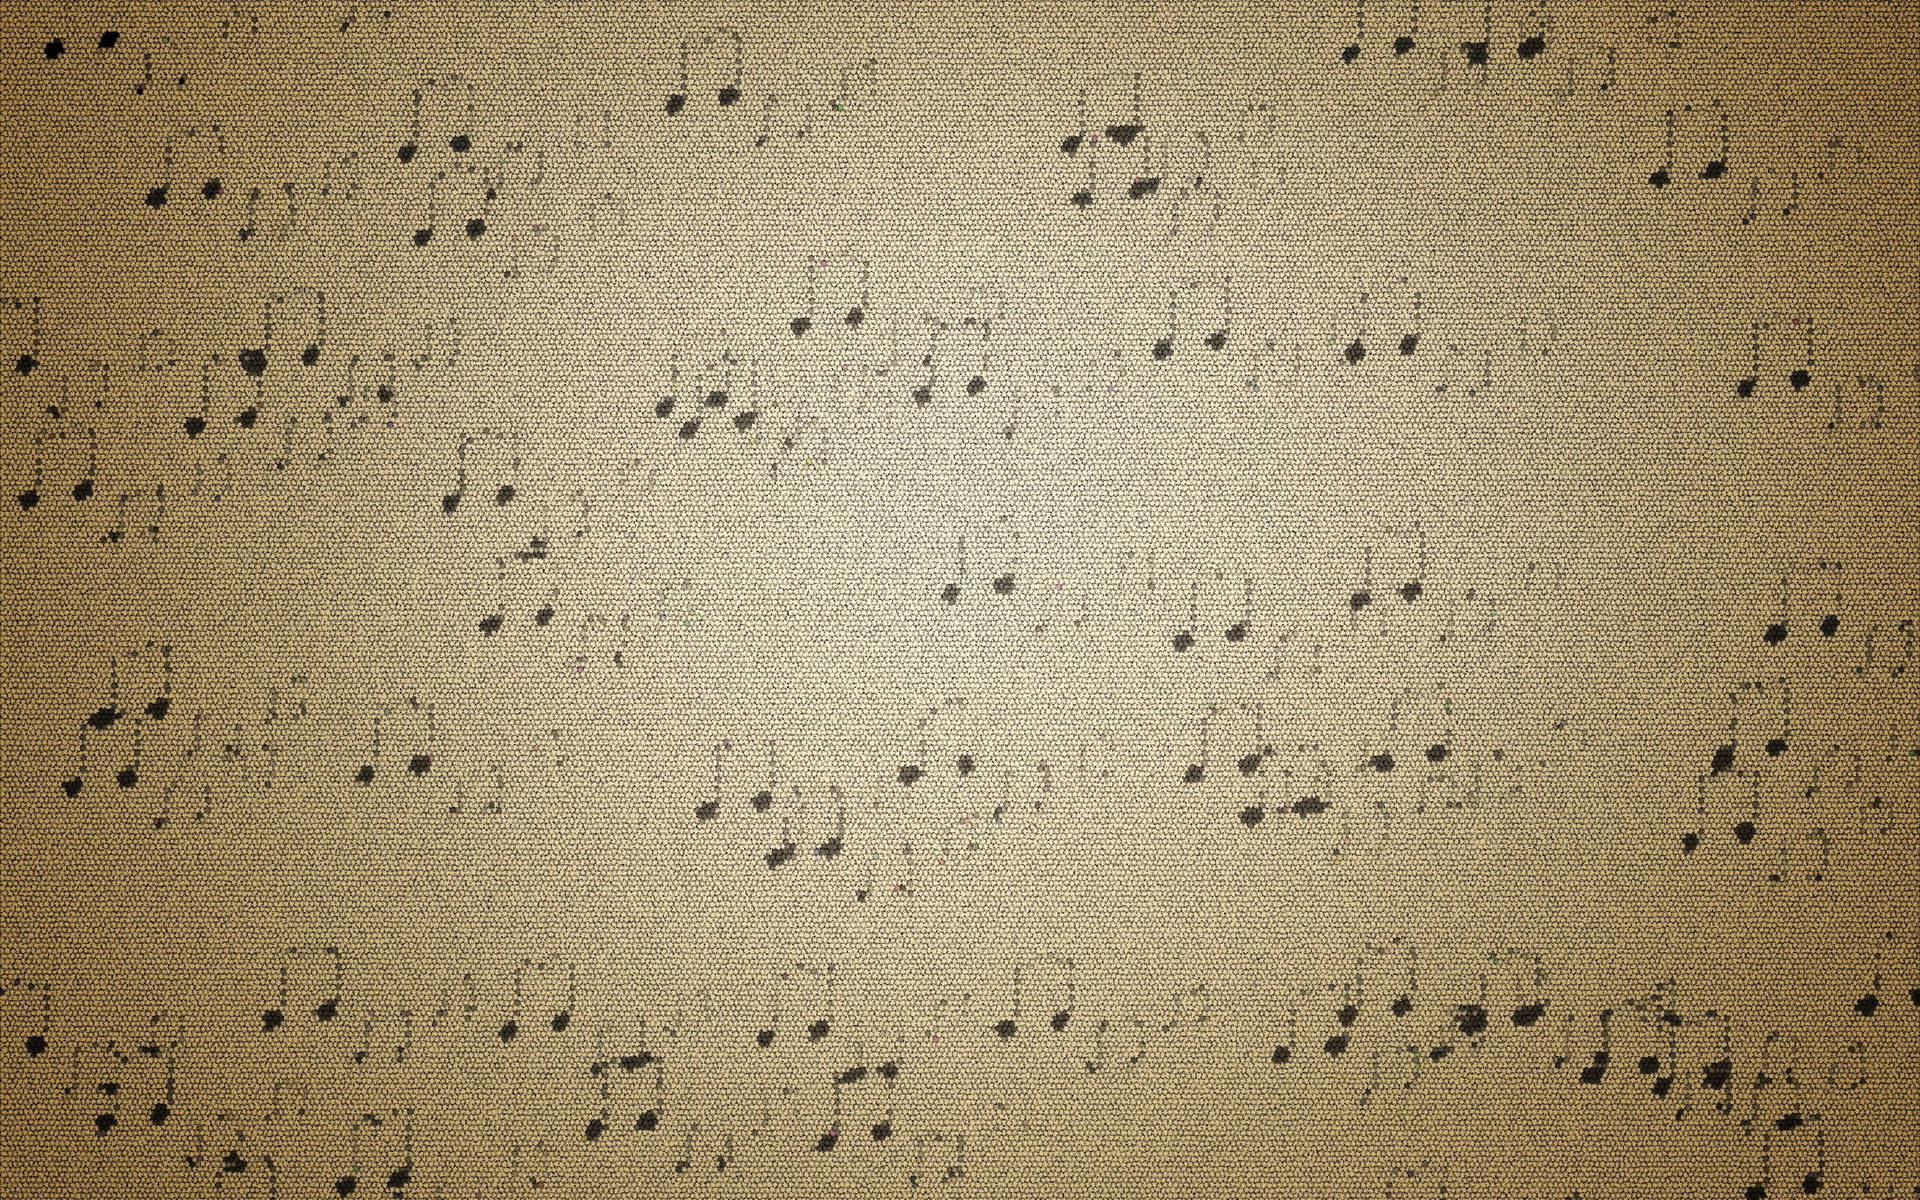 Musical Notes Blurry Paper Texture Background